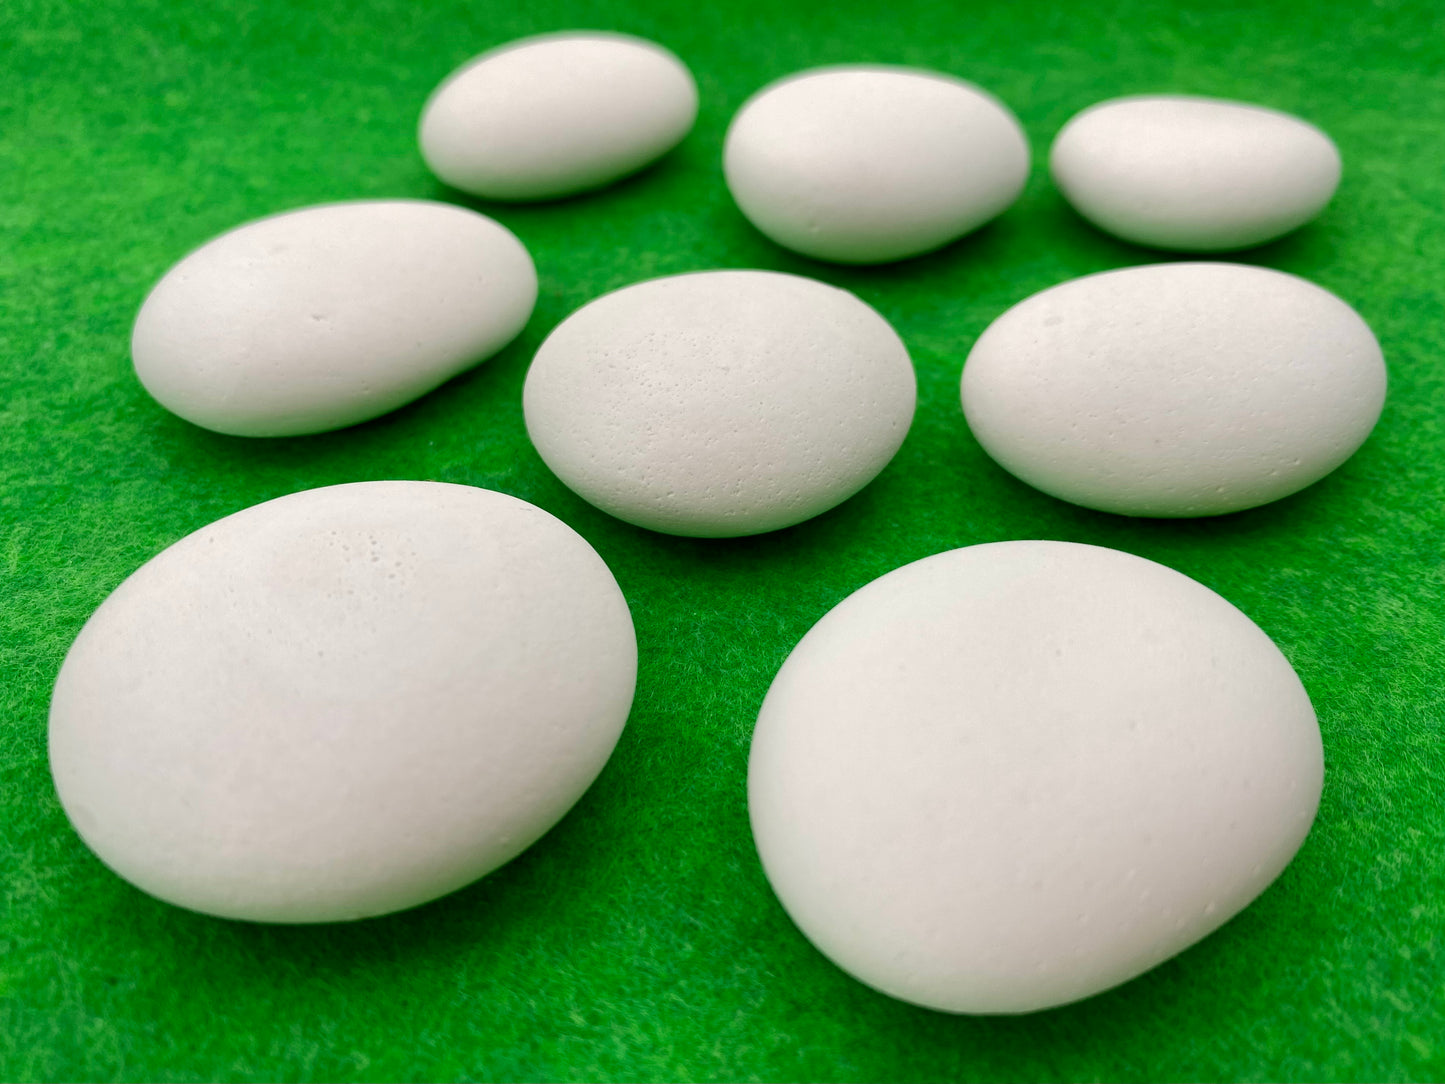 8 small white plaster pebbles of different shapes and sizes